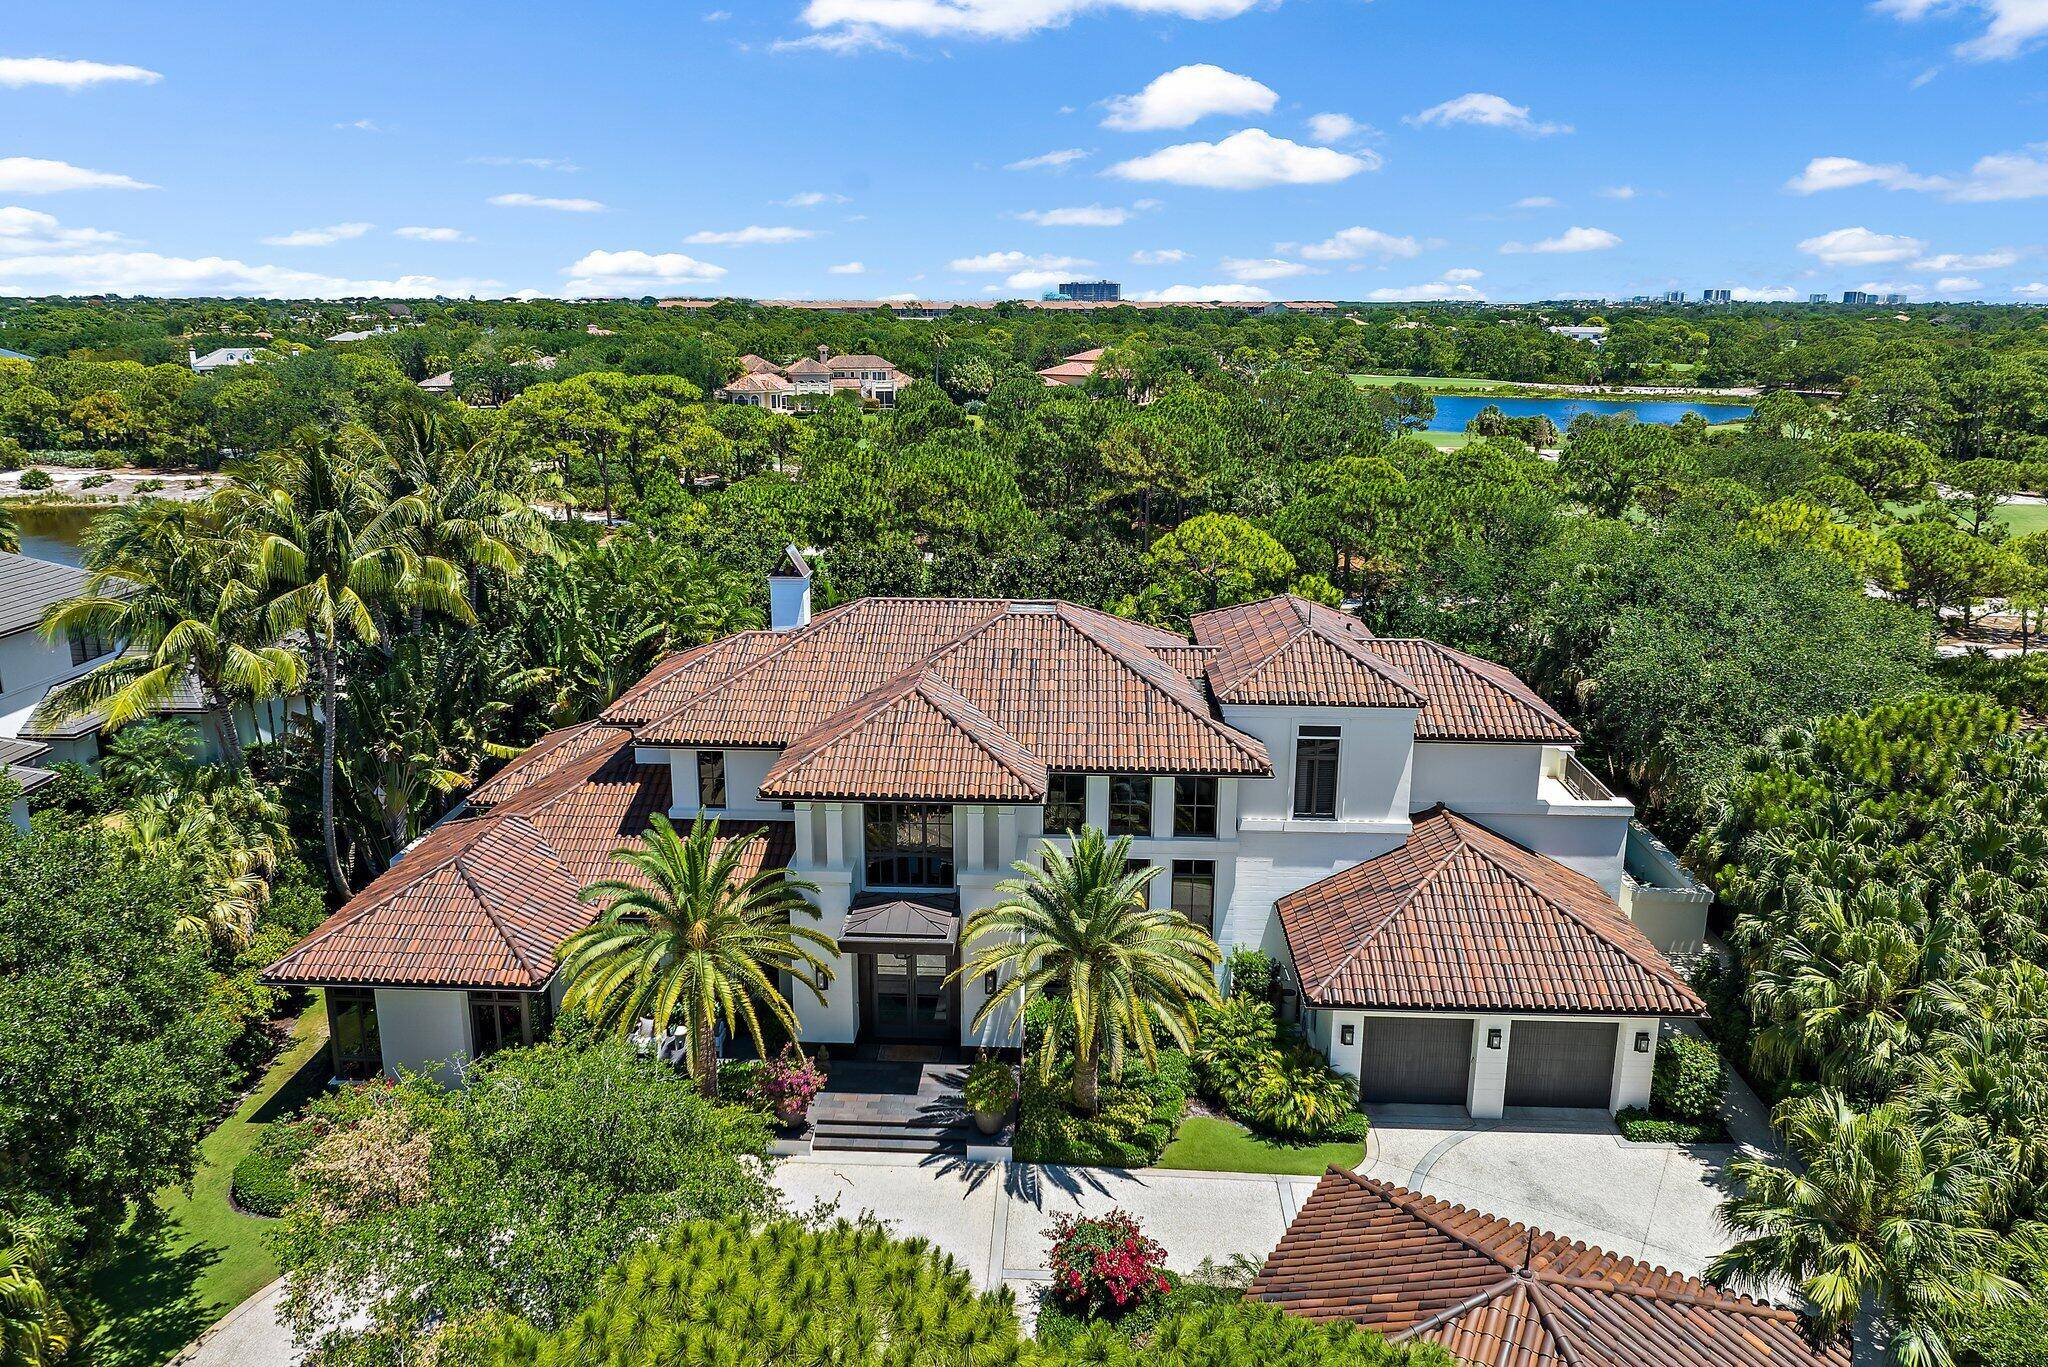 Located on nearly an acre along the second hole of the Nicklaus signature course at The Bears Club, this custom estate residence seamlessly integrates modern elements with timeless charm.